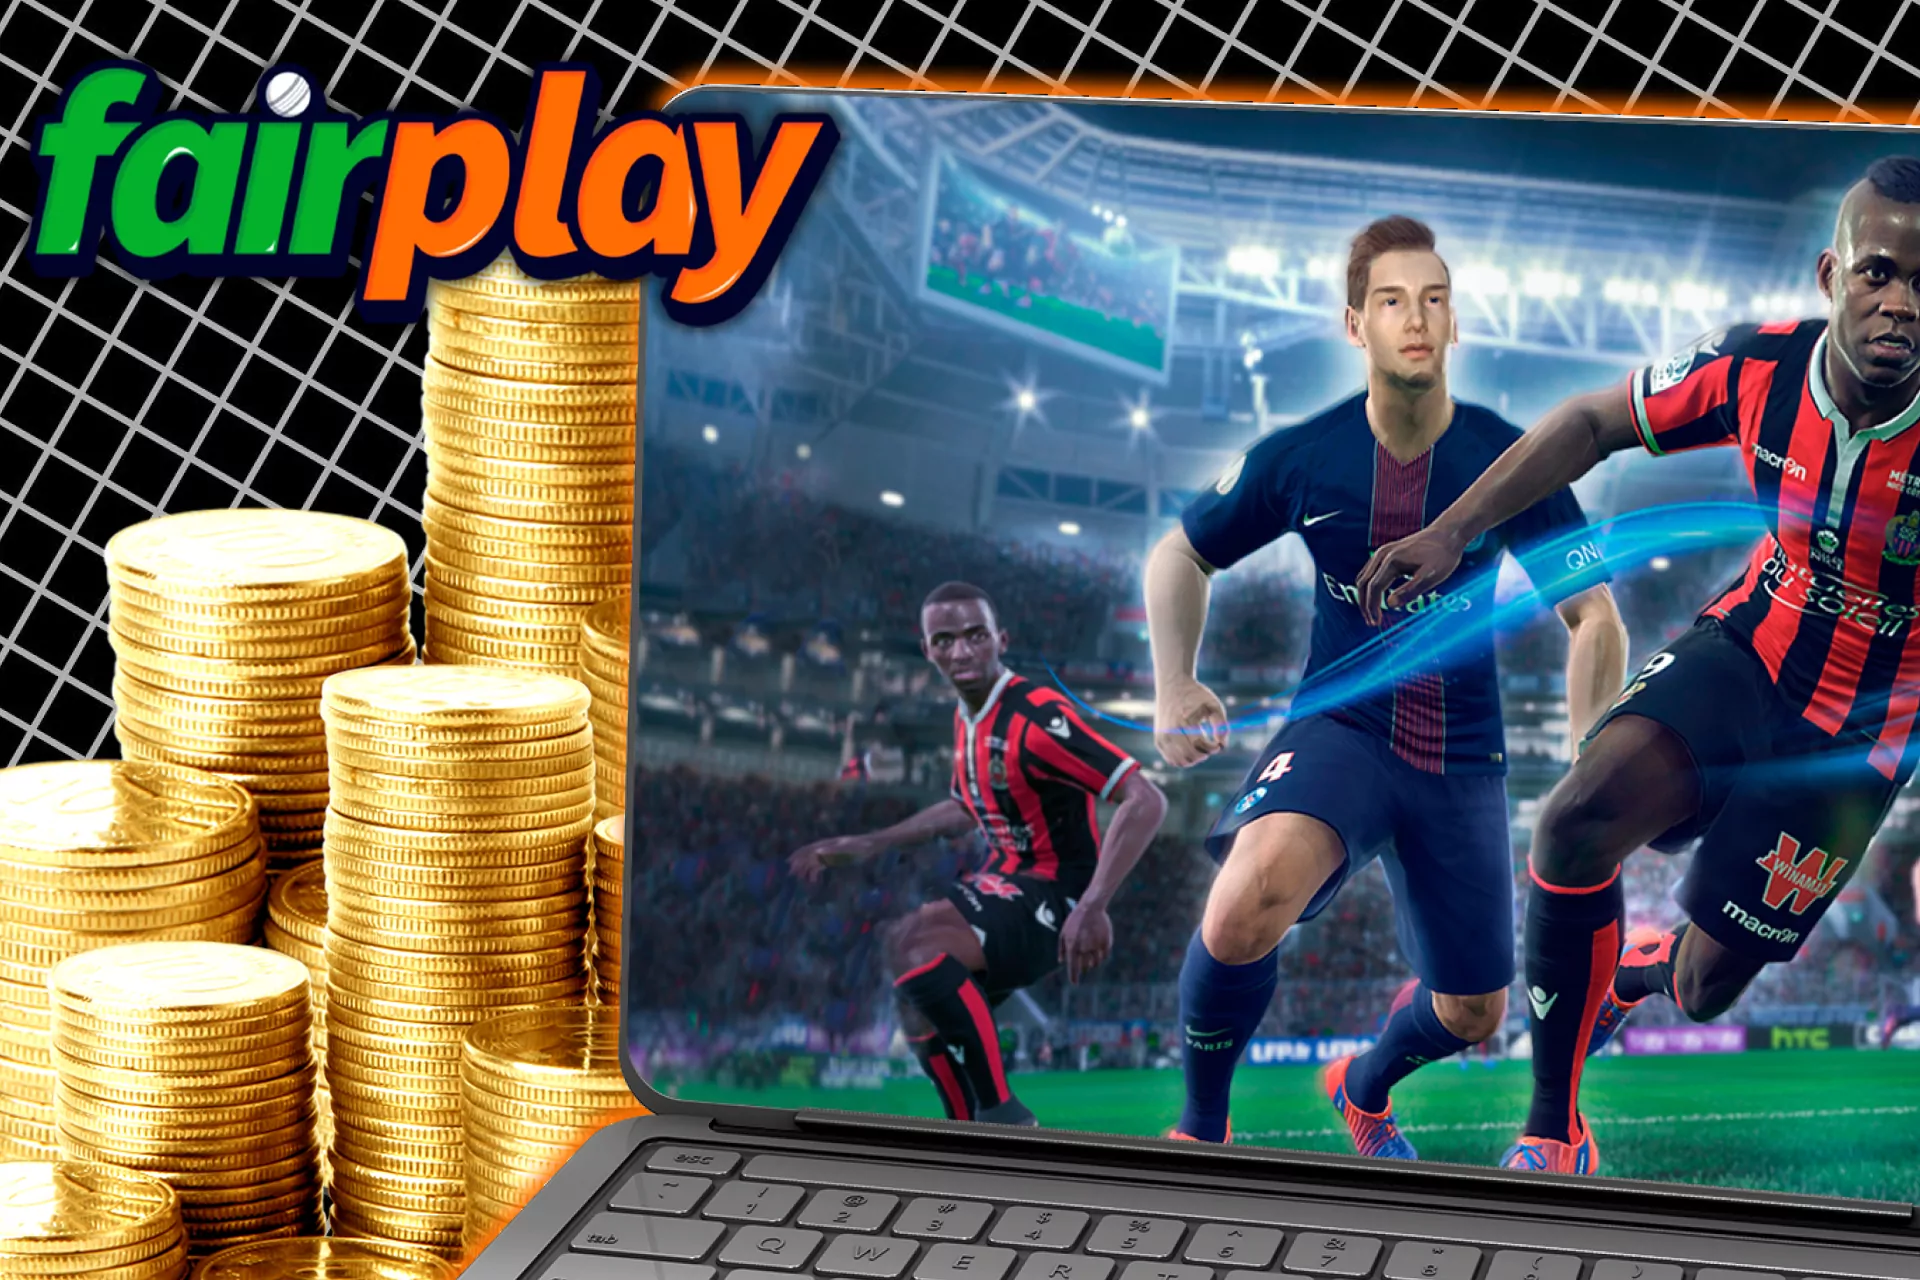 Bet on Fantasy sports at Fairplay.